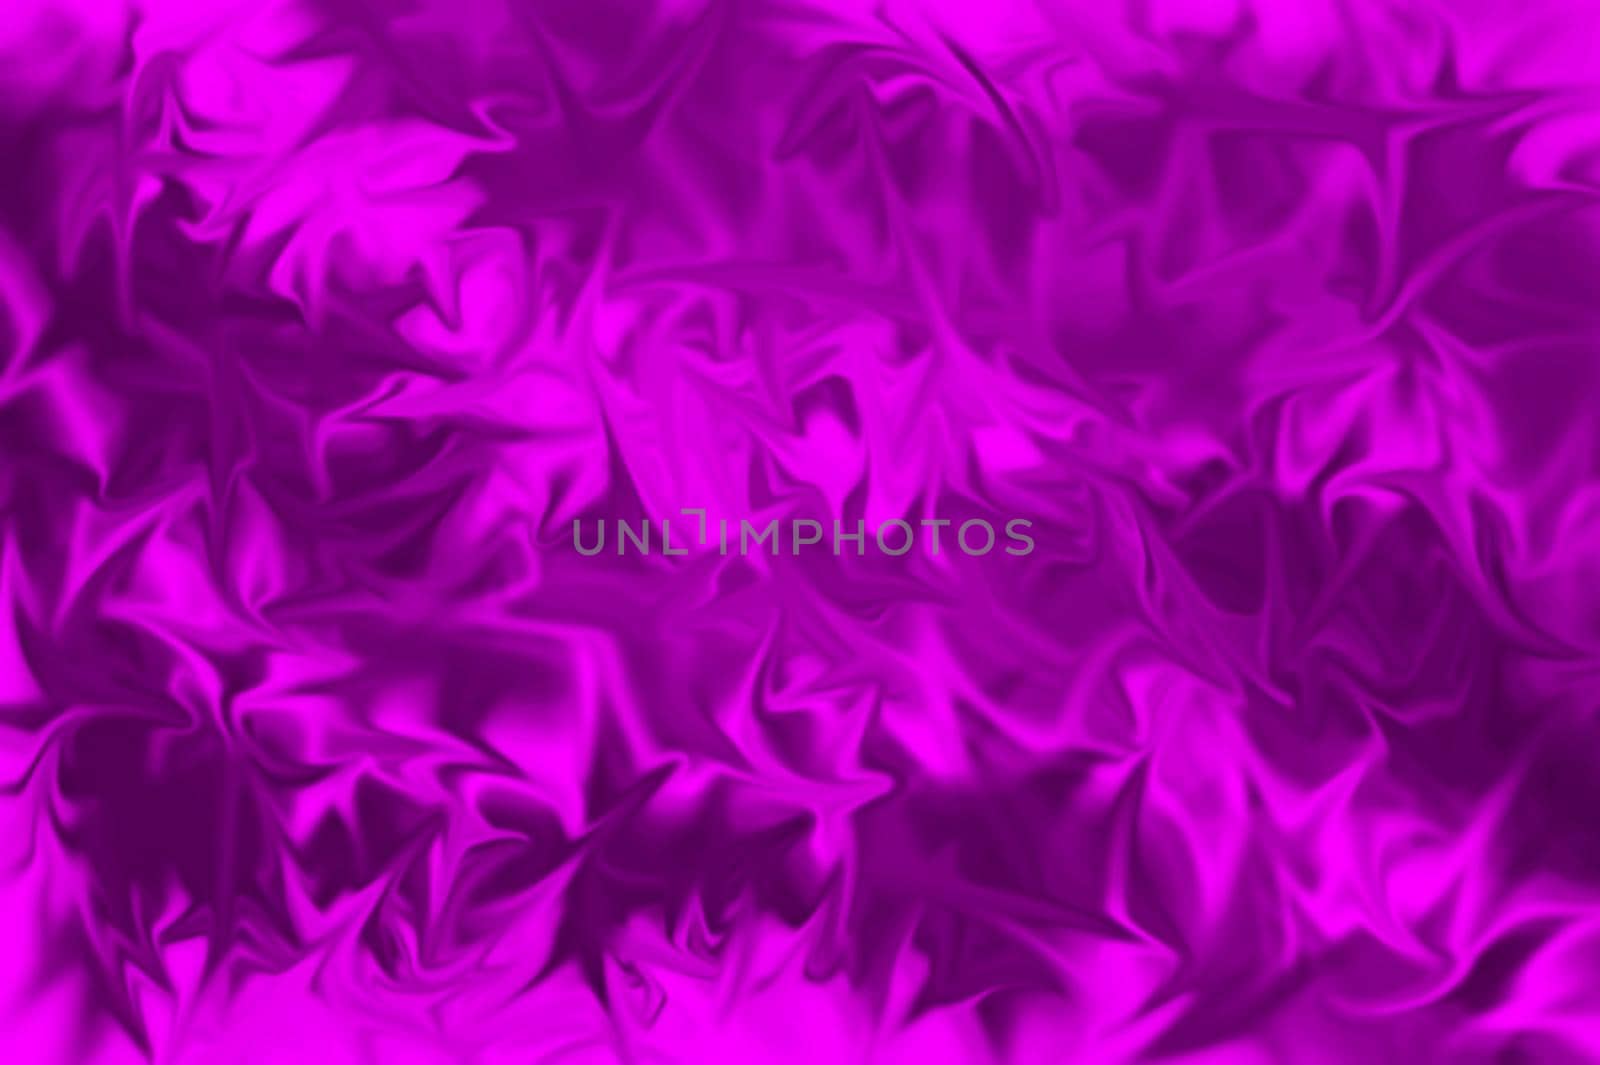 Bright multicolor abstract background with a motion blur effect. Digitally painted background effects. Smeared textures.